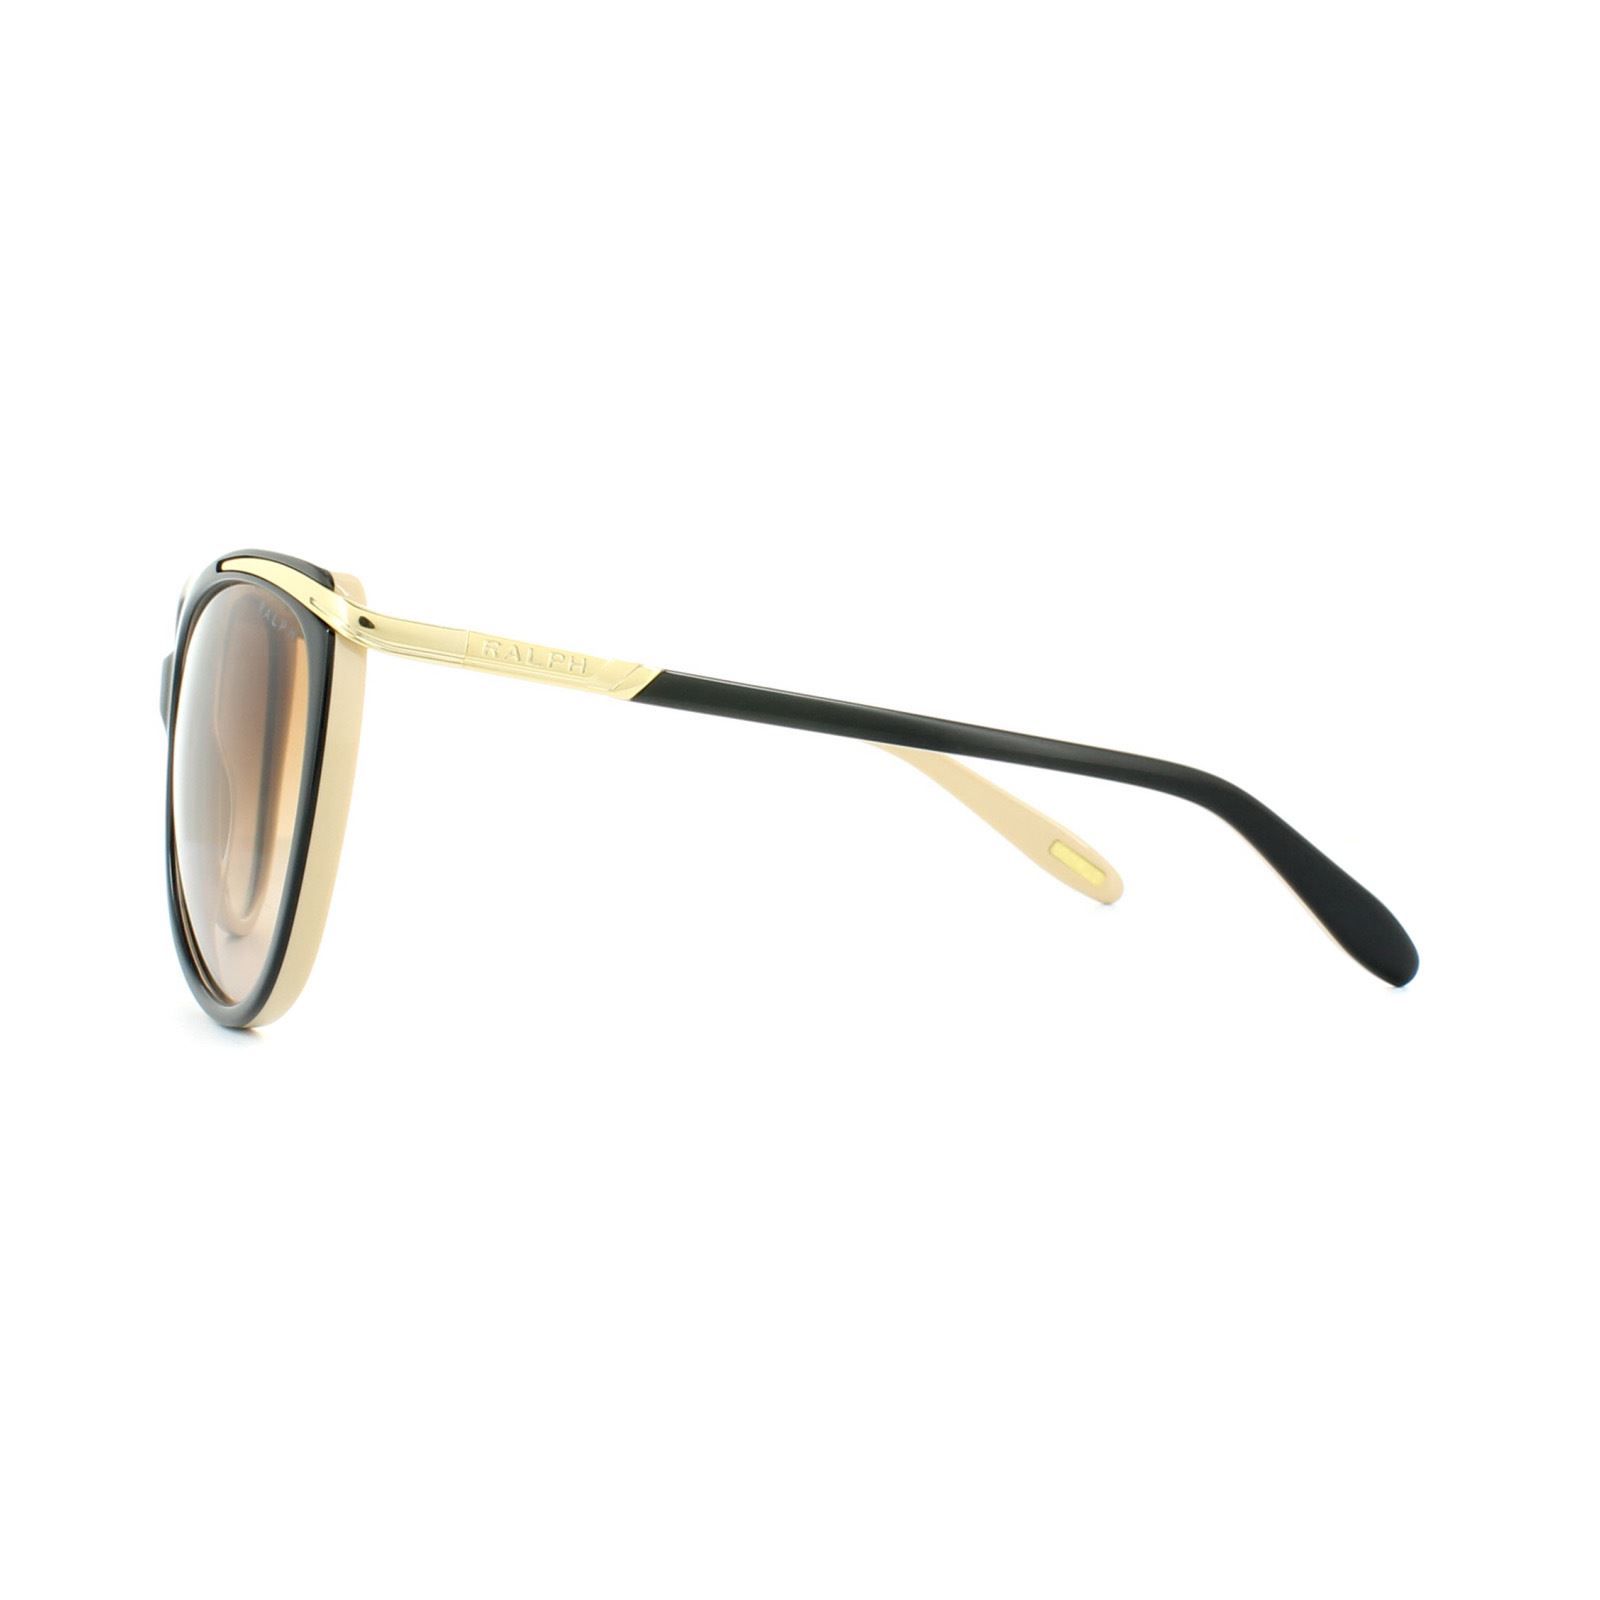 Ralph by Ralph Lauren Sunglasses 5150 109013 Dark Brown Brown Orange Gradient are an oversized cat's eye shape with the lifted corners enhanced by metal from the temples continuing round onto the front corners in a really classy detail what works so well and highlights the Ralph logo nicely too.